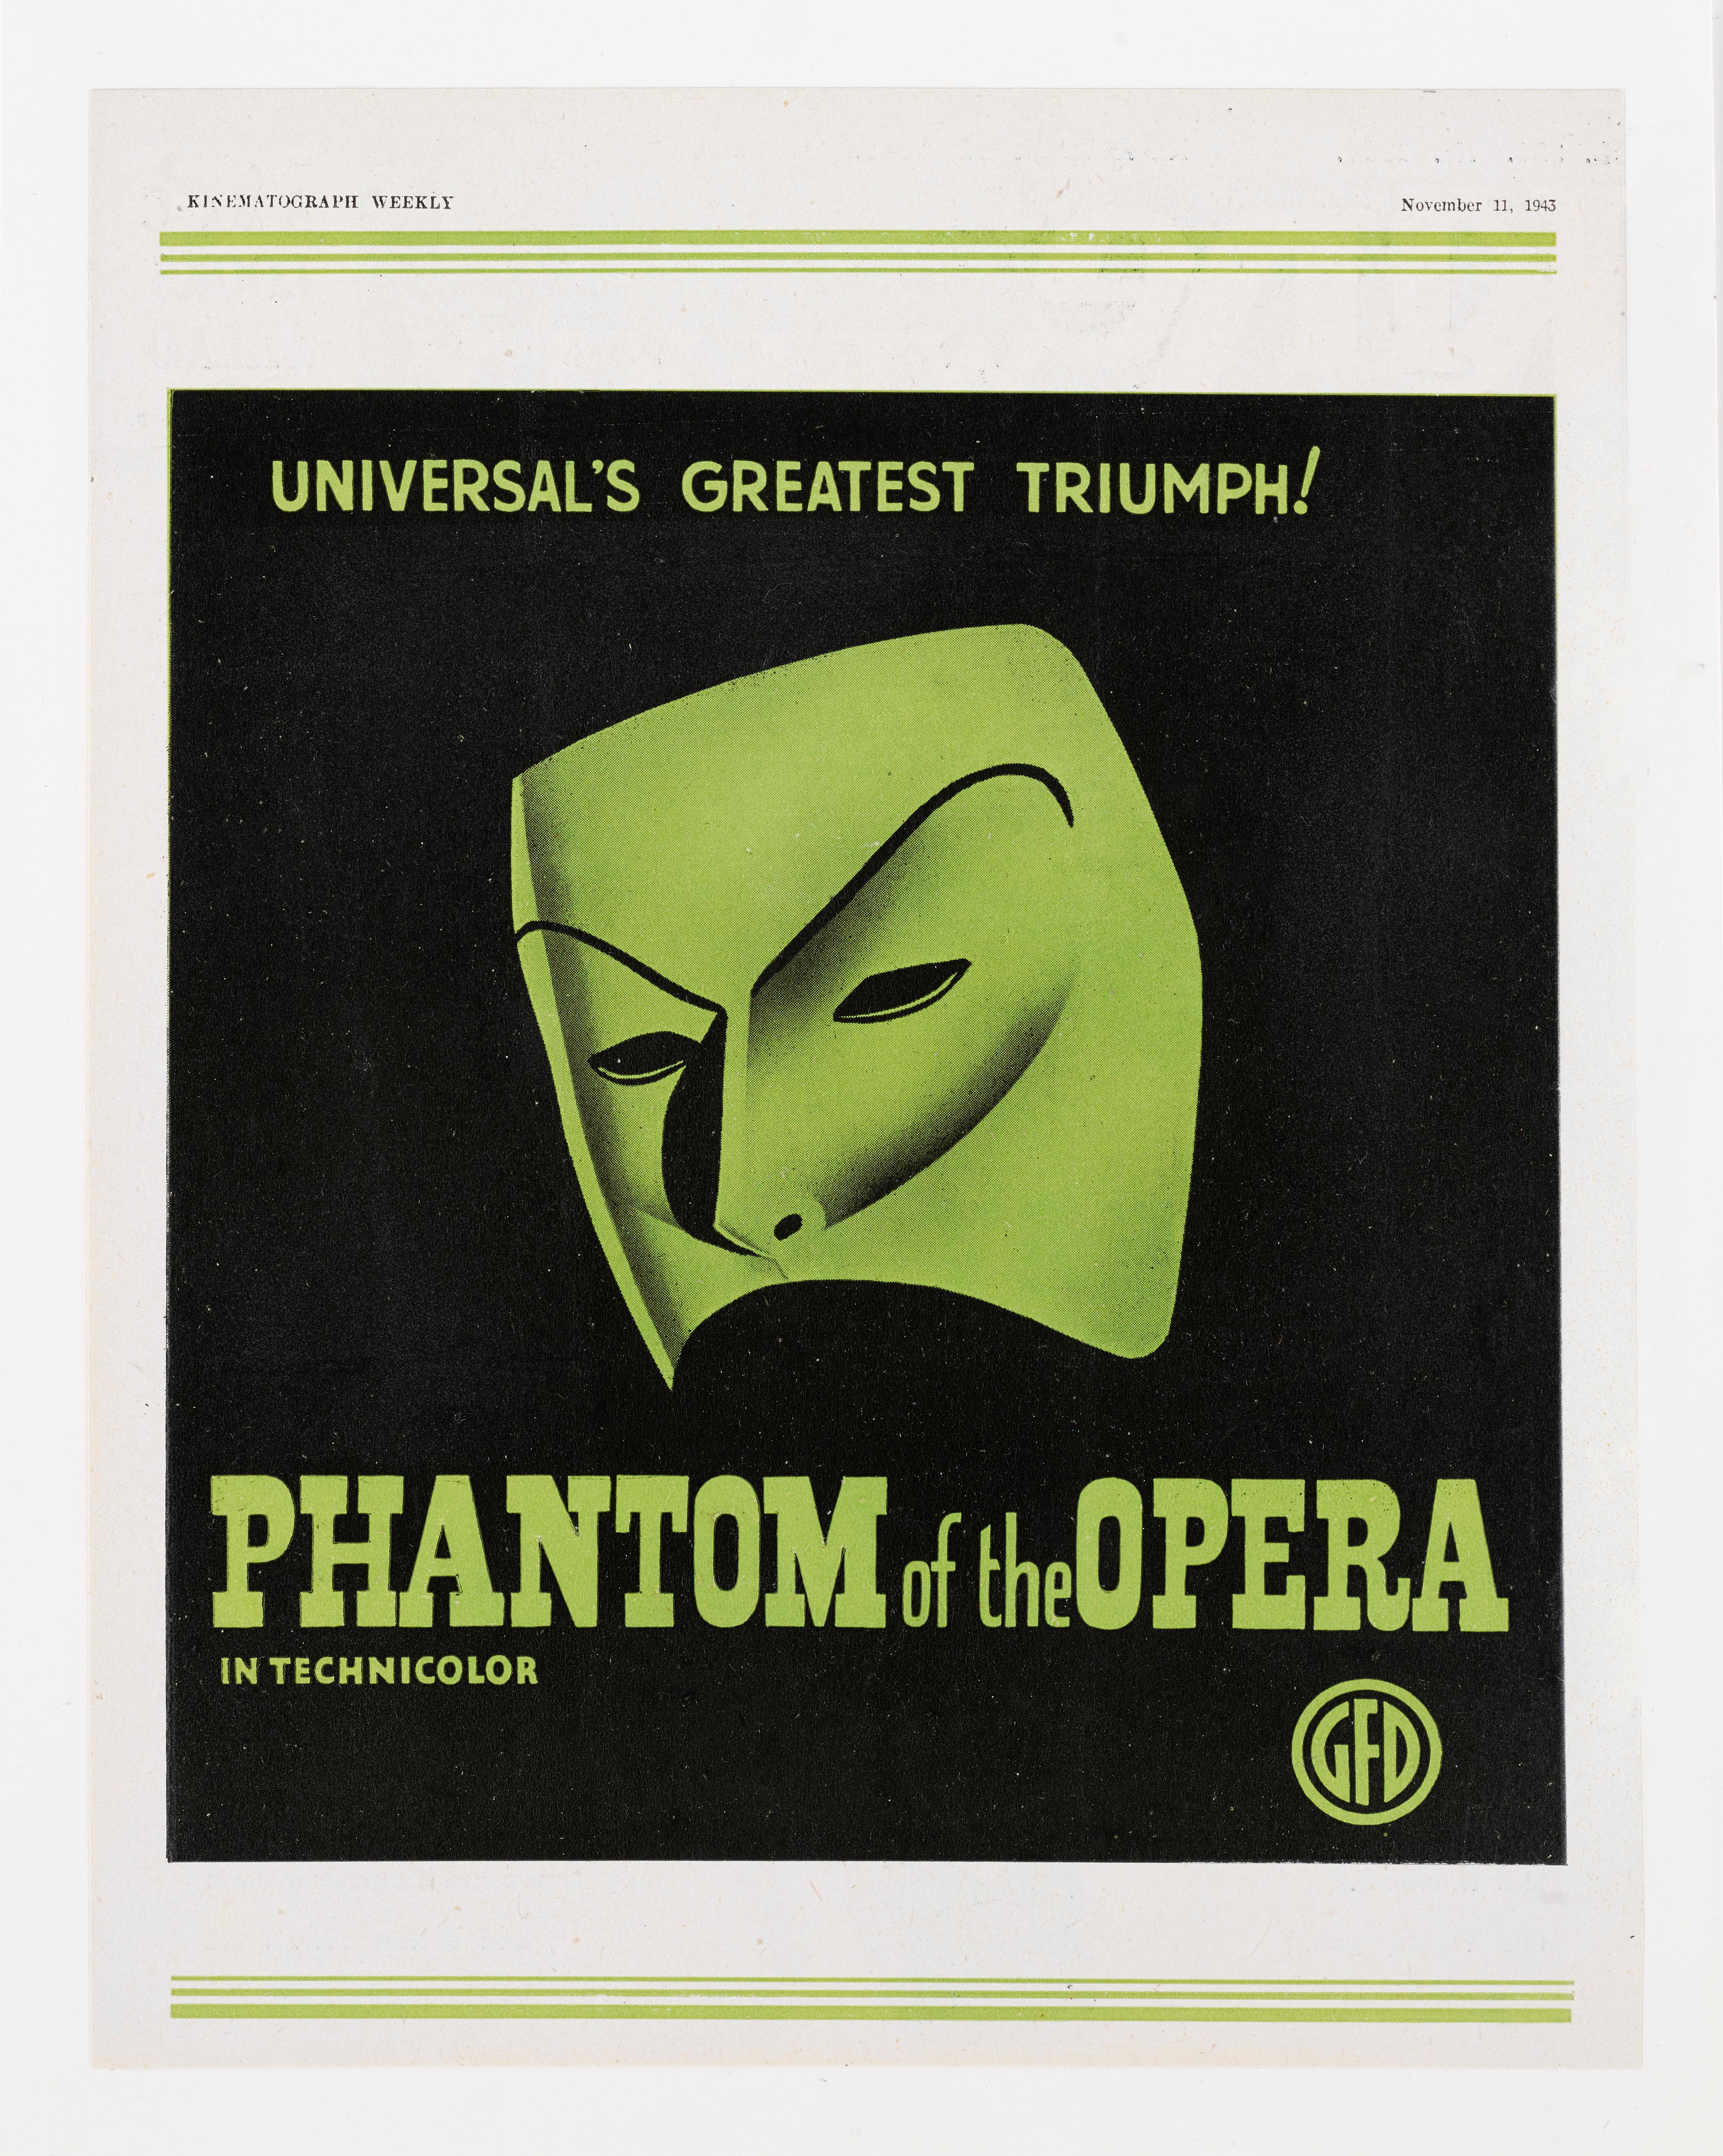 Original British trade advertisement from Kinematograph Weekly - Nov. 11 the 1943 , for the 1943 Horror film The Phantom of the Opera directed by Arthur Lubin and starring Claude Rains.
The piece is conservation paper backed and would be sent out